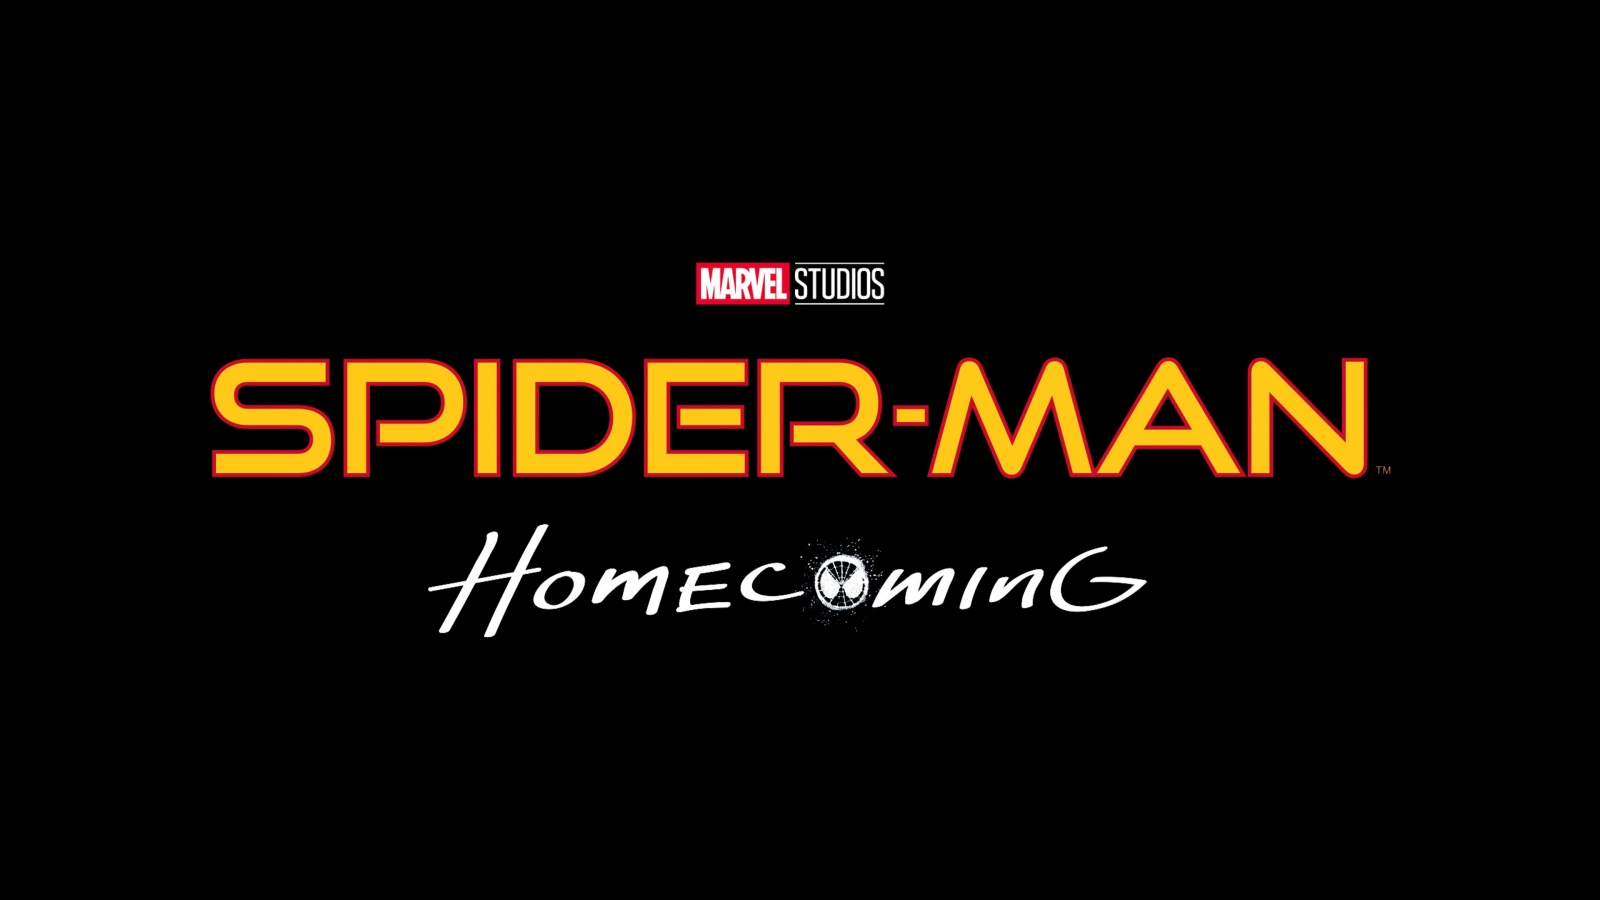 Spiderman Homecoming 2017 for 1600 x 900 HDTV resolution